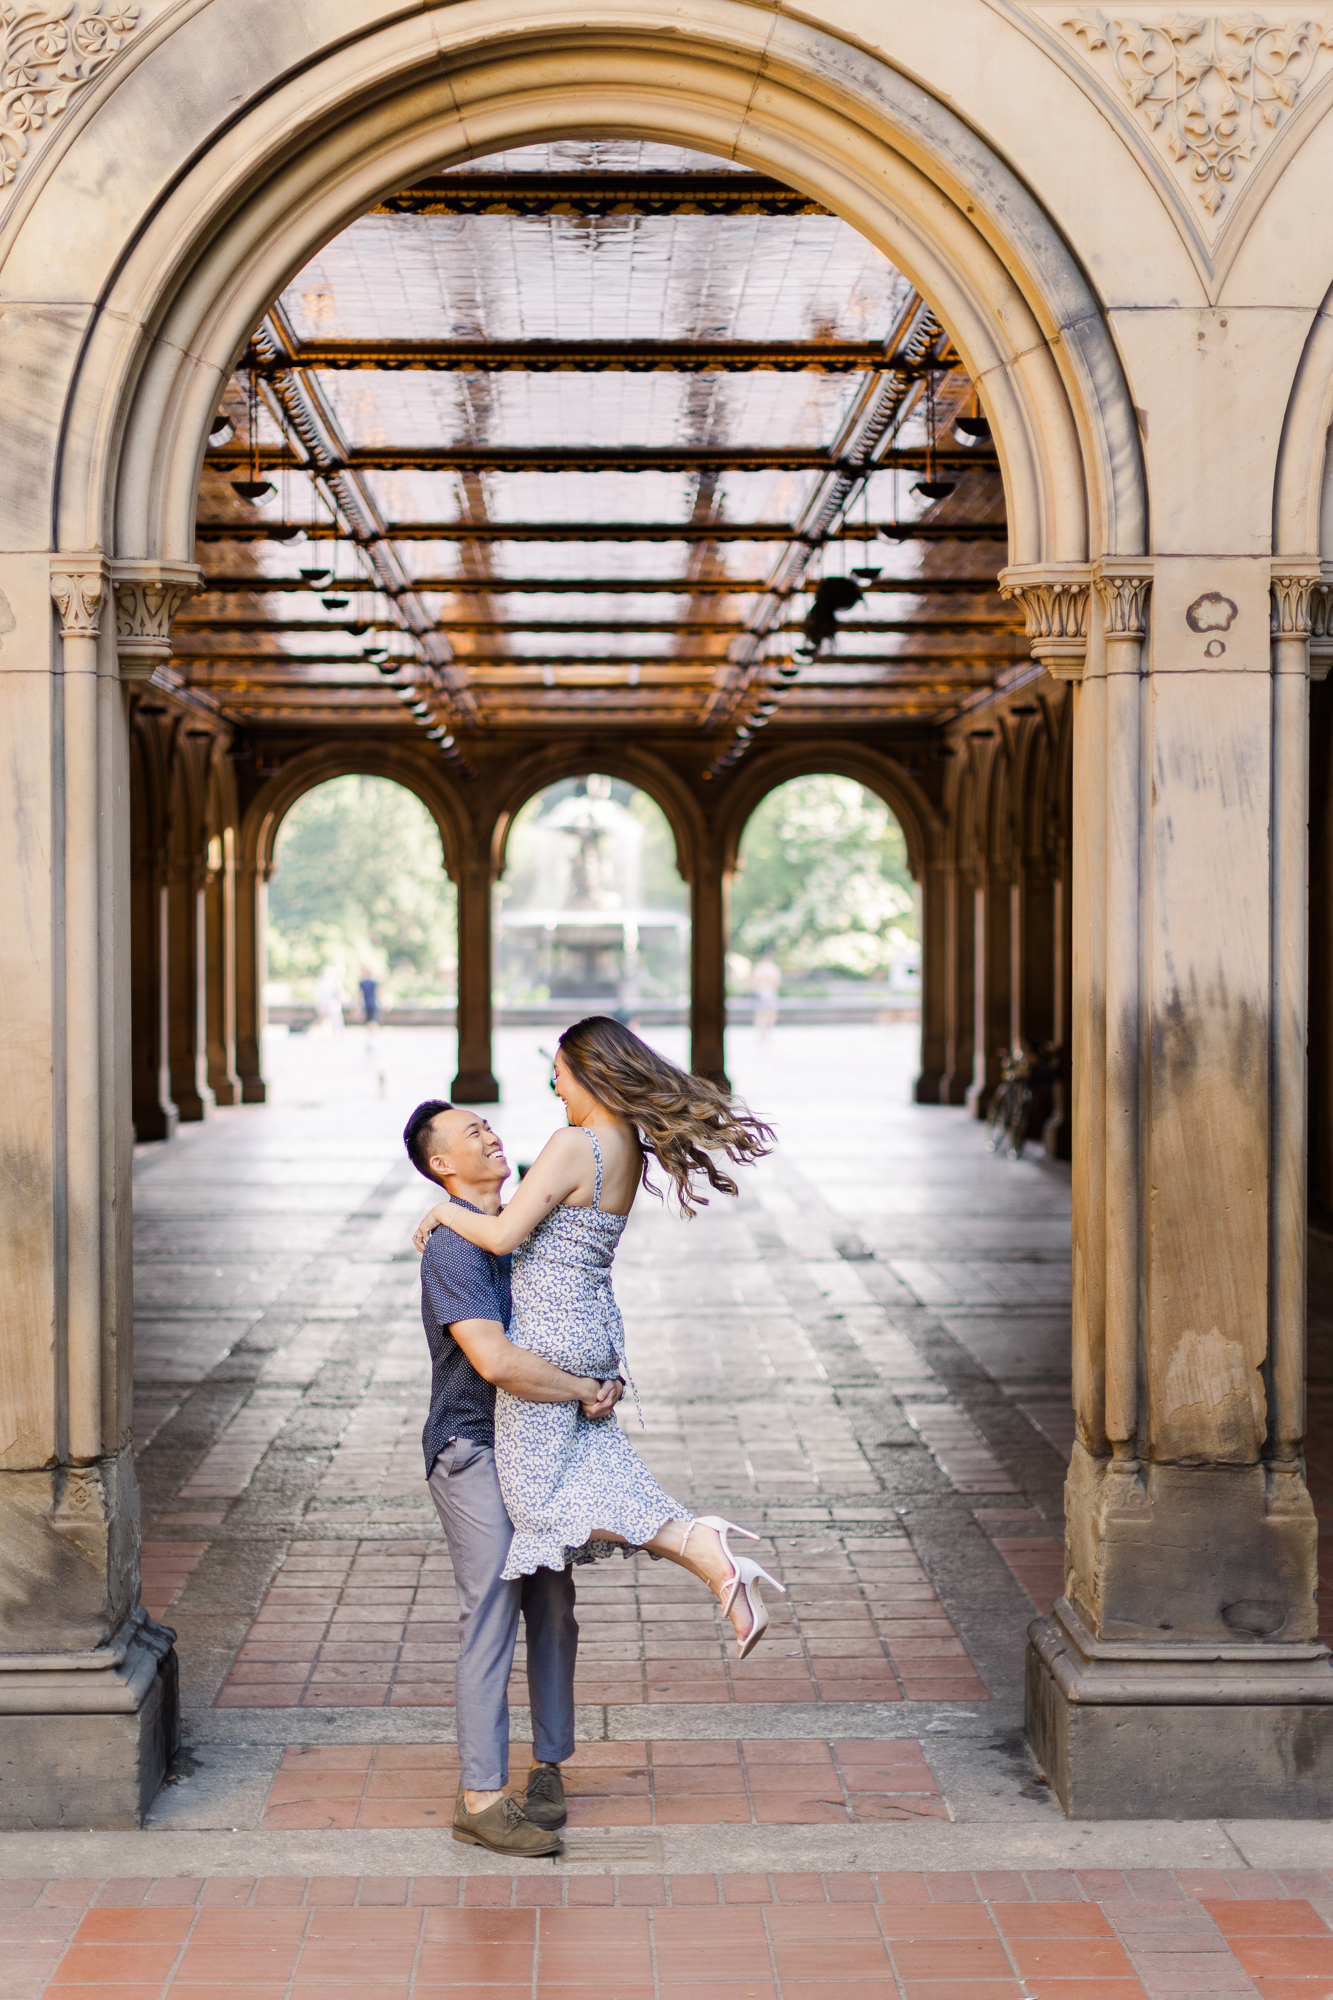 Fun Engagement Photos in Central Park, New York